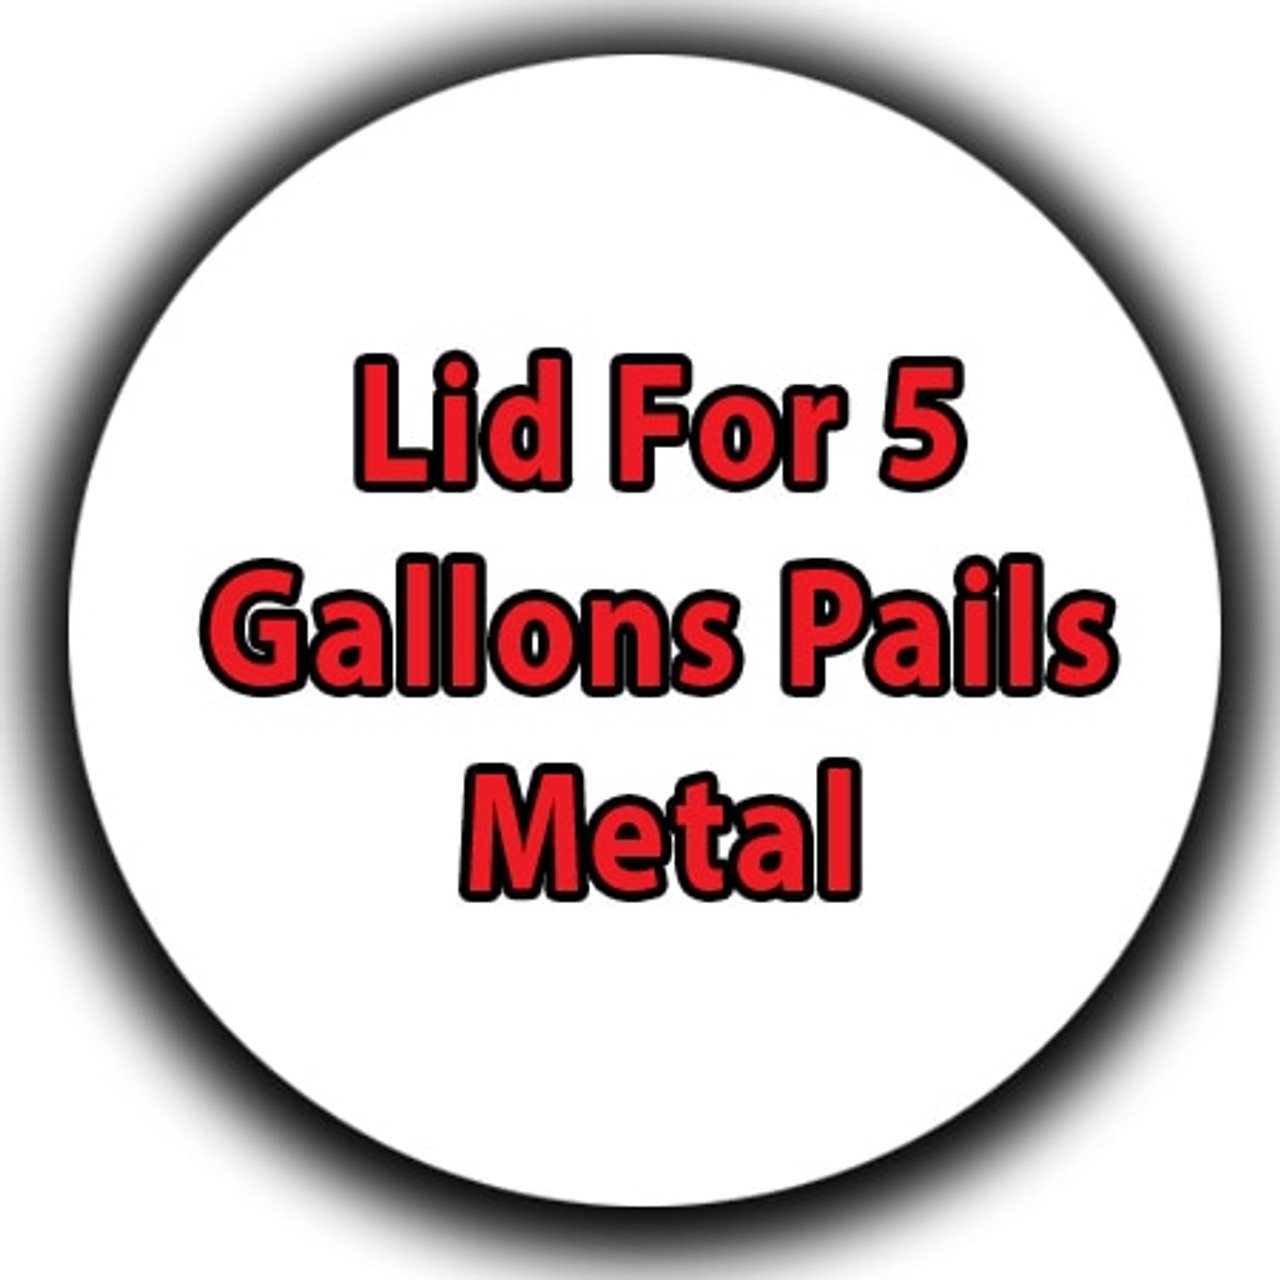 Professional Wood Finish Lid For 5 Gallons Pails Metal